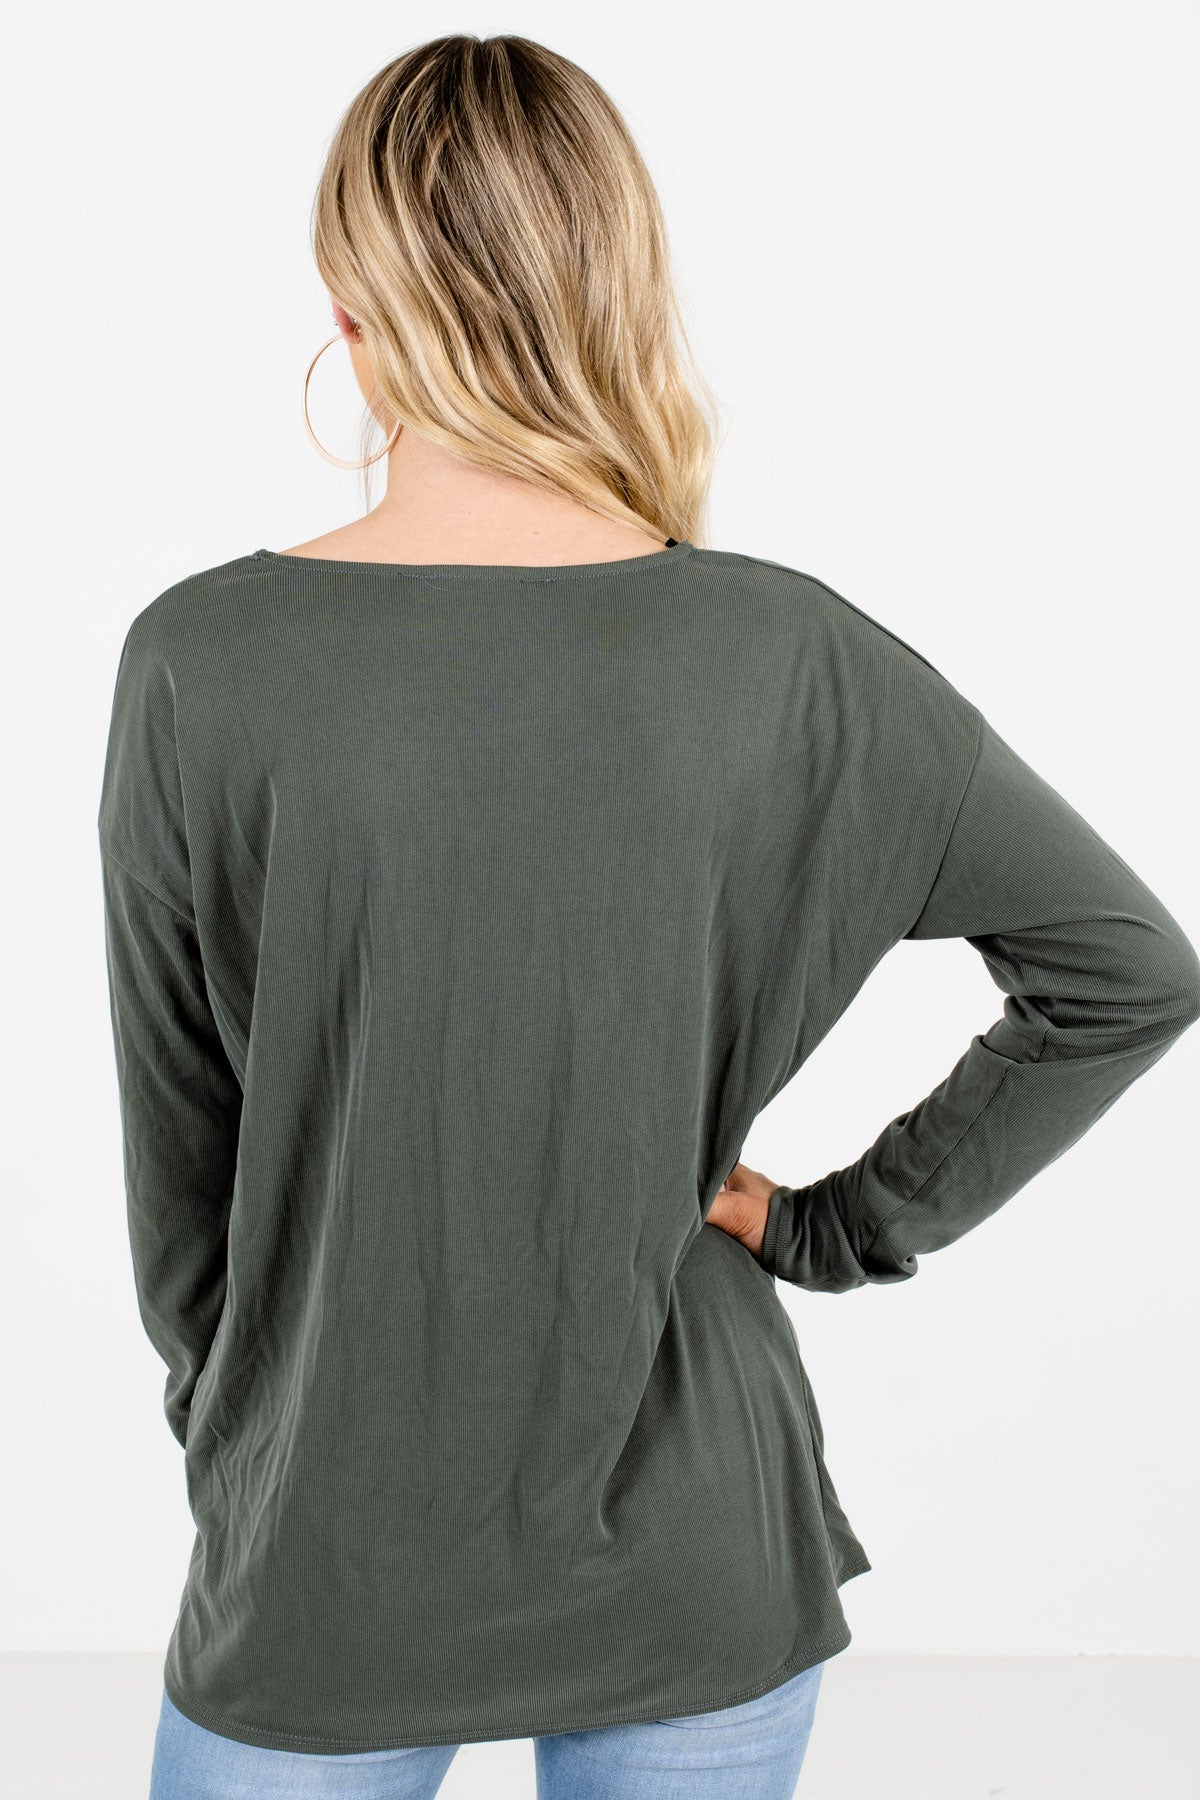 Women’s Green Ribbed Material Boutique Tops